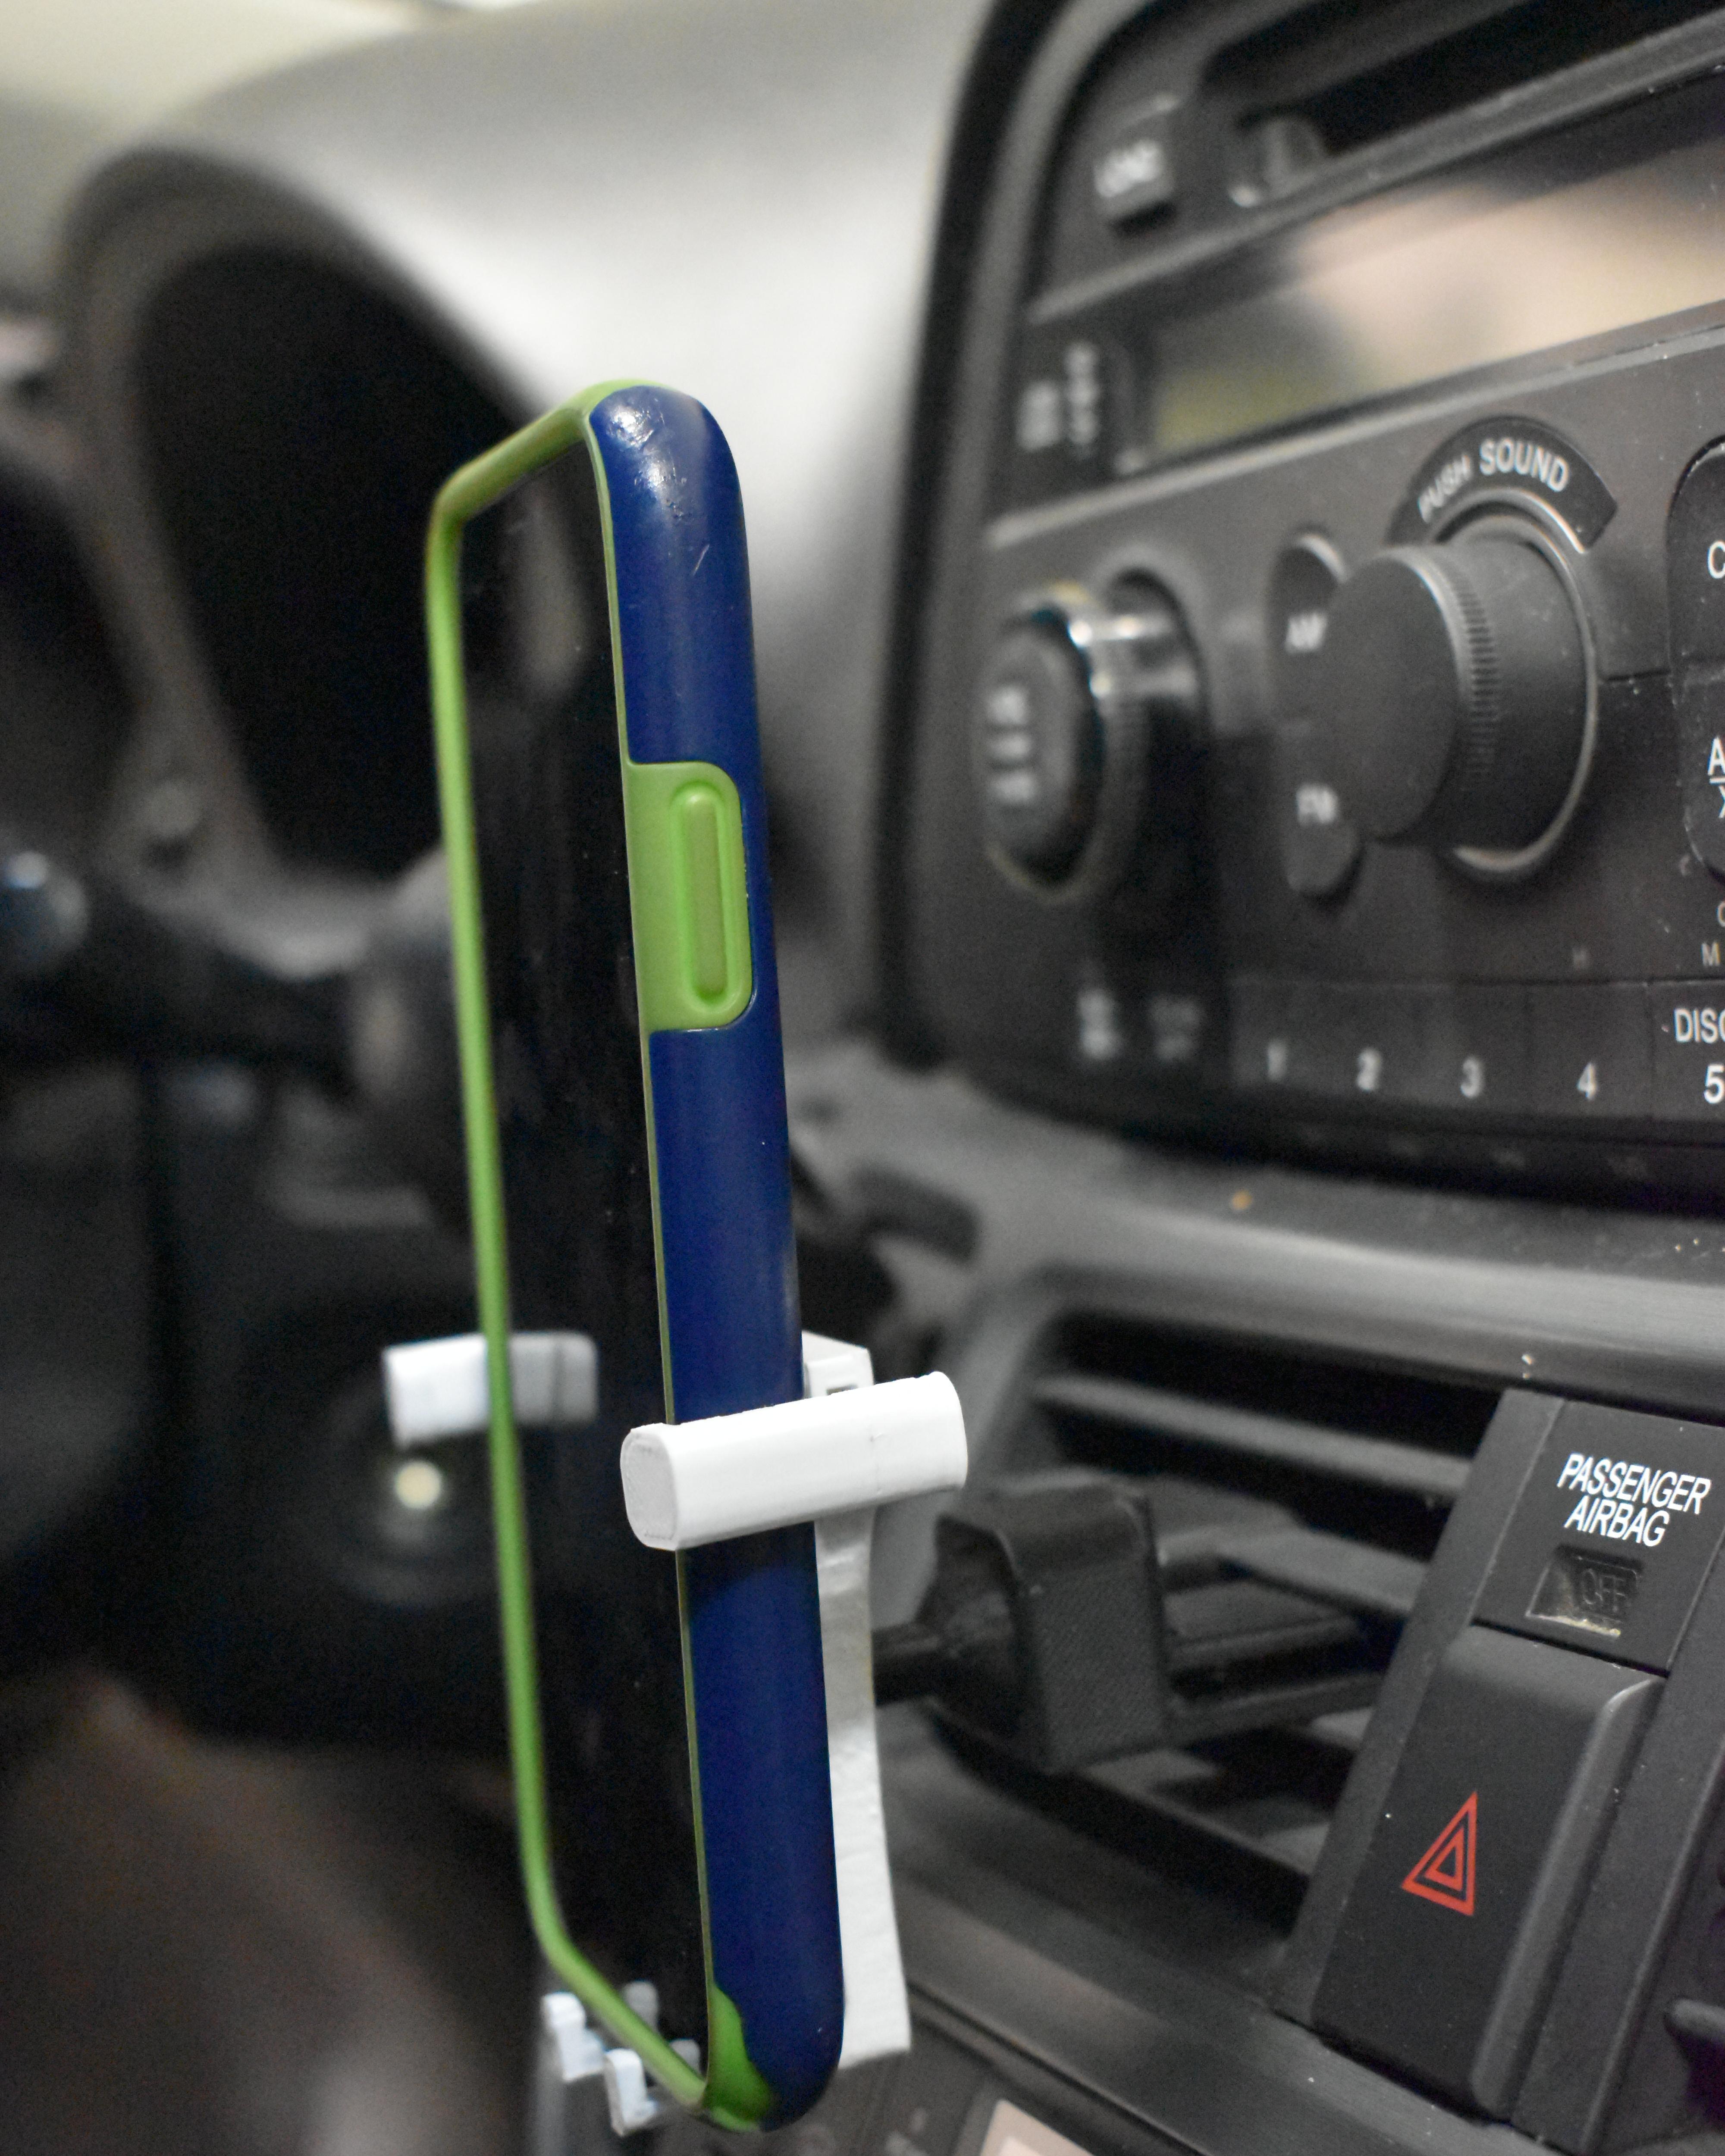 3D Printed Universal Car Smart Phone Mount Designed in Tinkercad